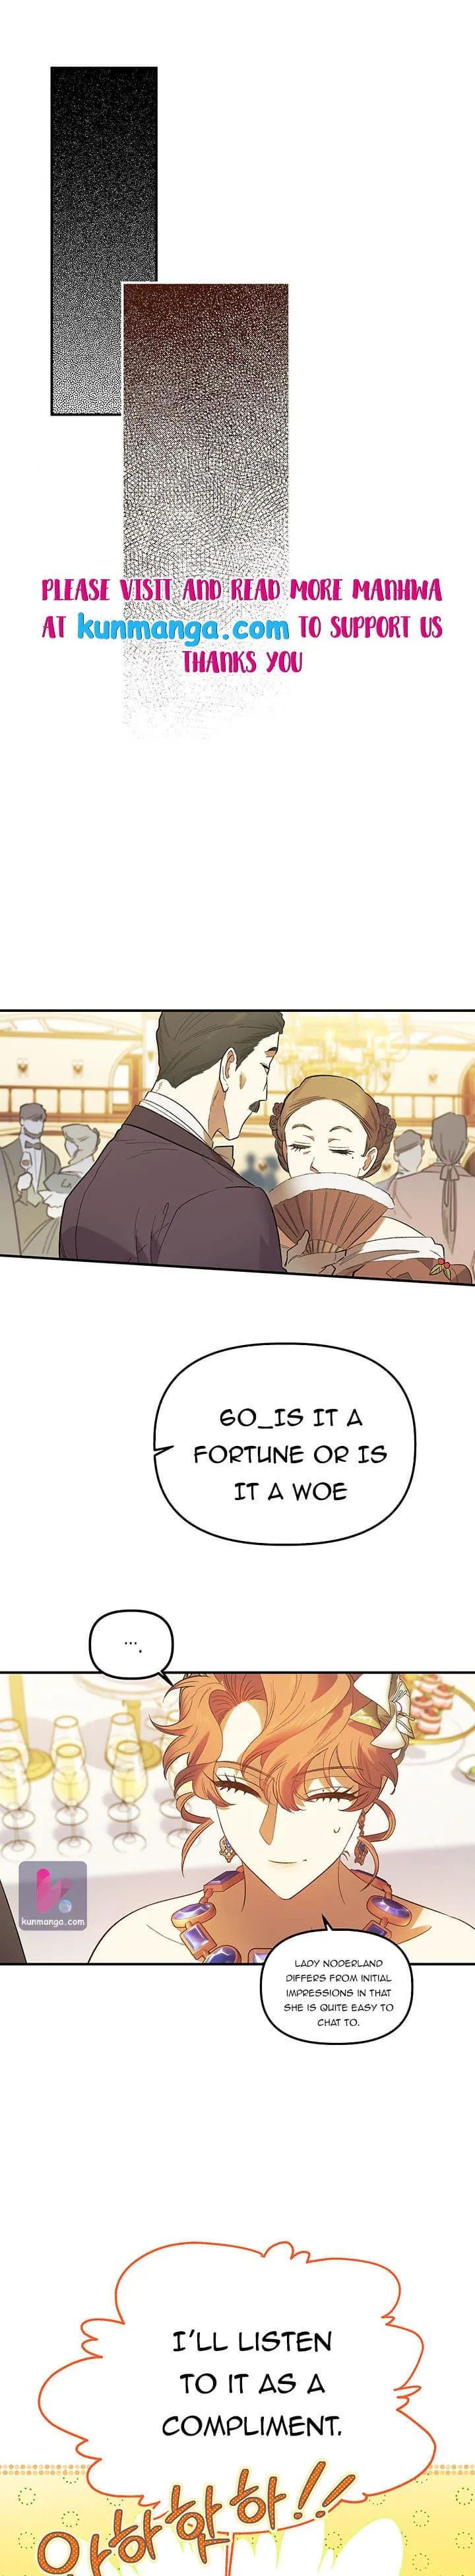 For Better Or Worse Ch 1 Read For Better Or For Worse Chapter 60 on Mangakakalot